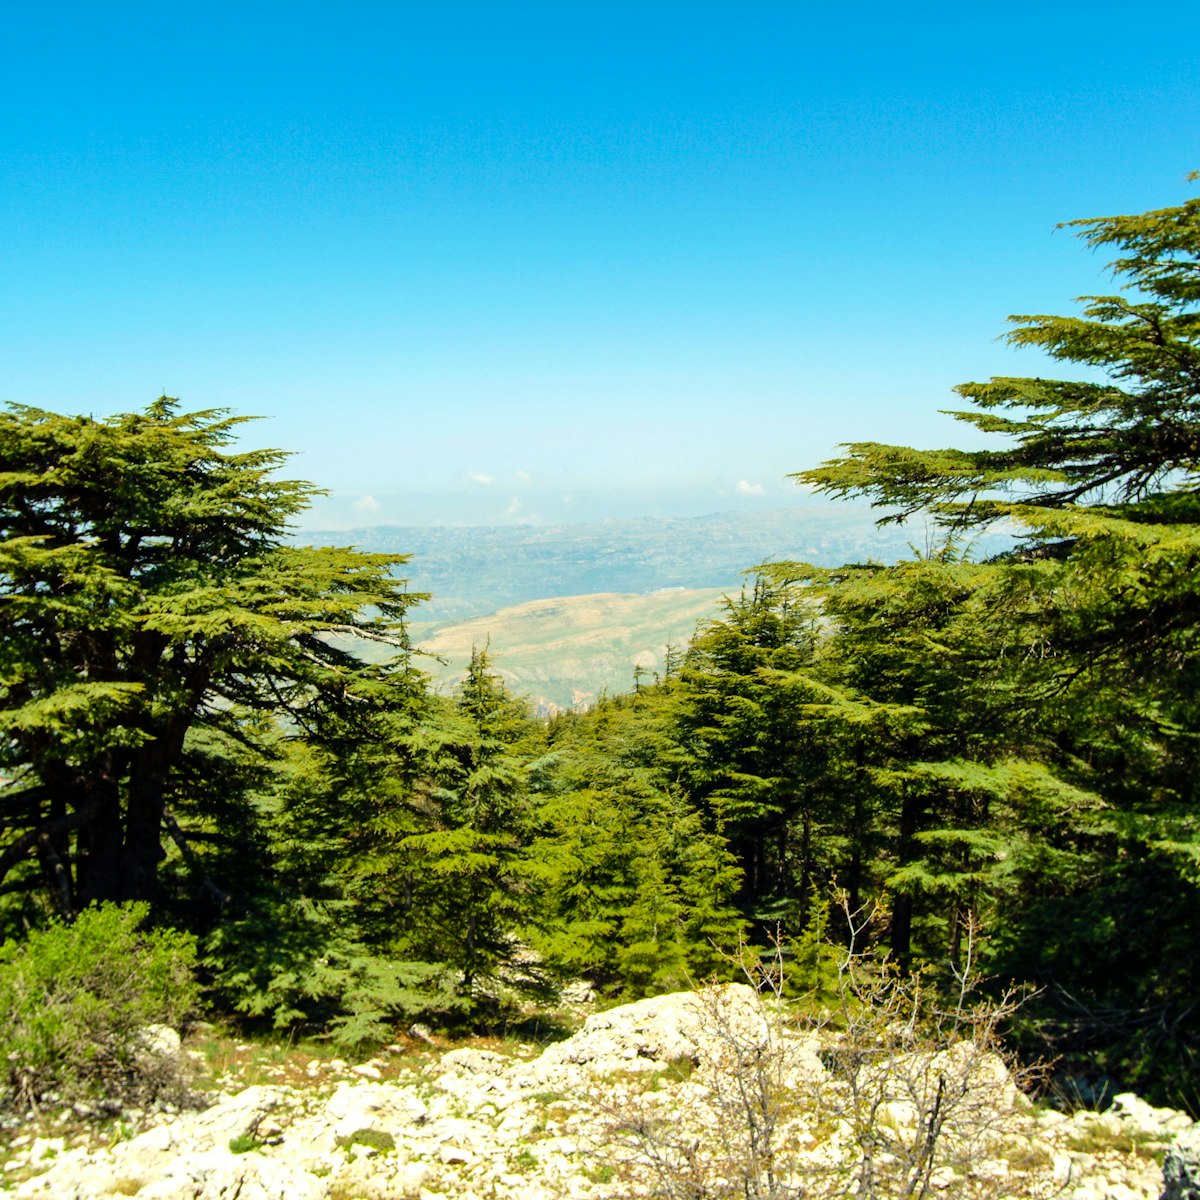 Cedars growing at 6,000 feet in the Shouf Biosphere Reserve in Lebanon.